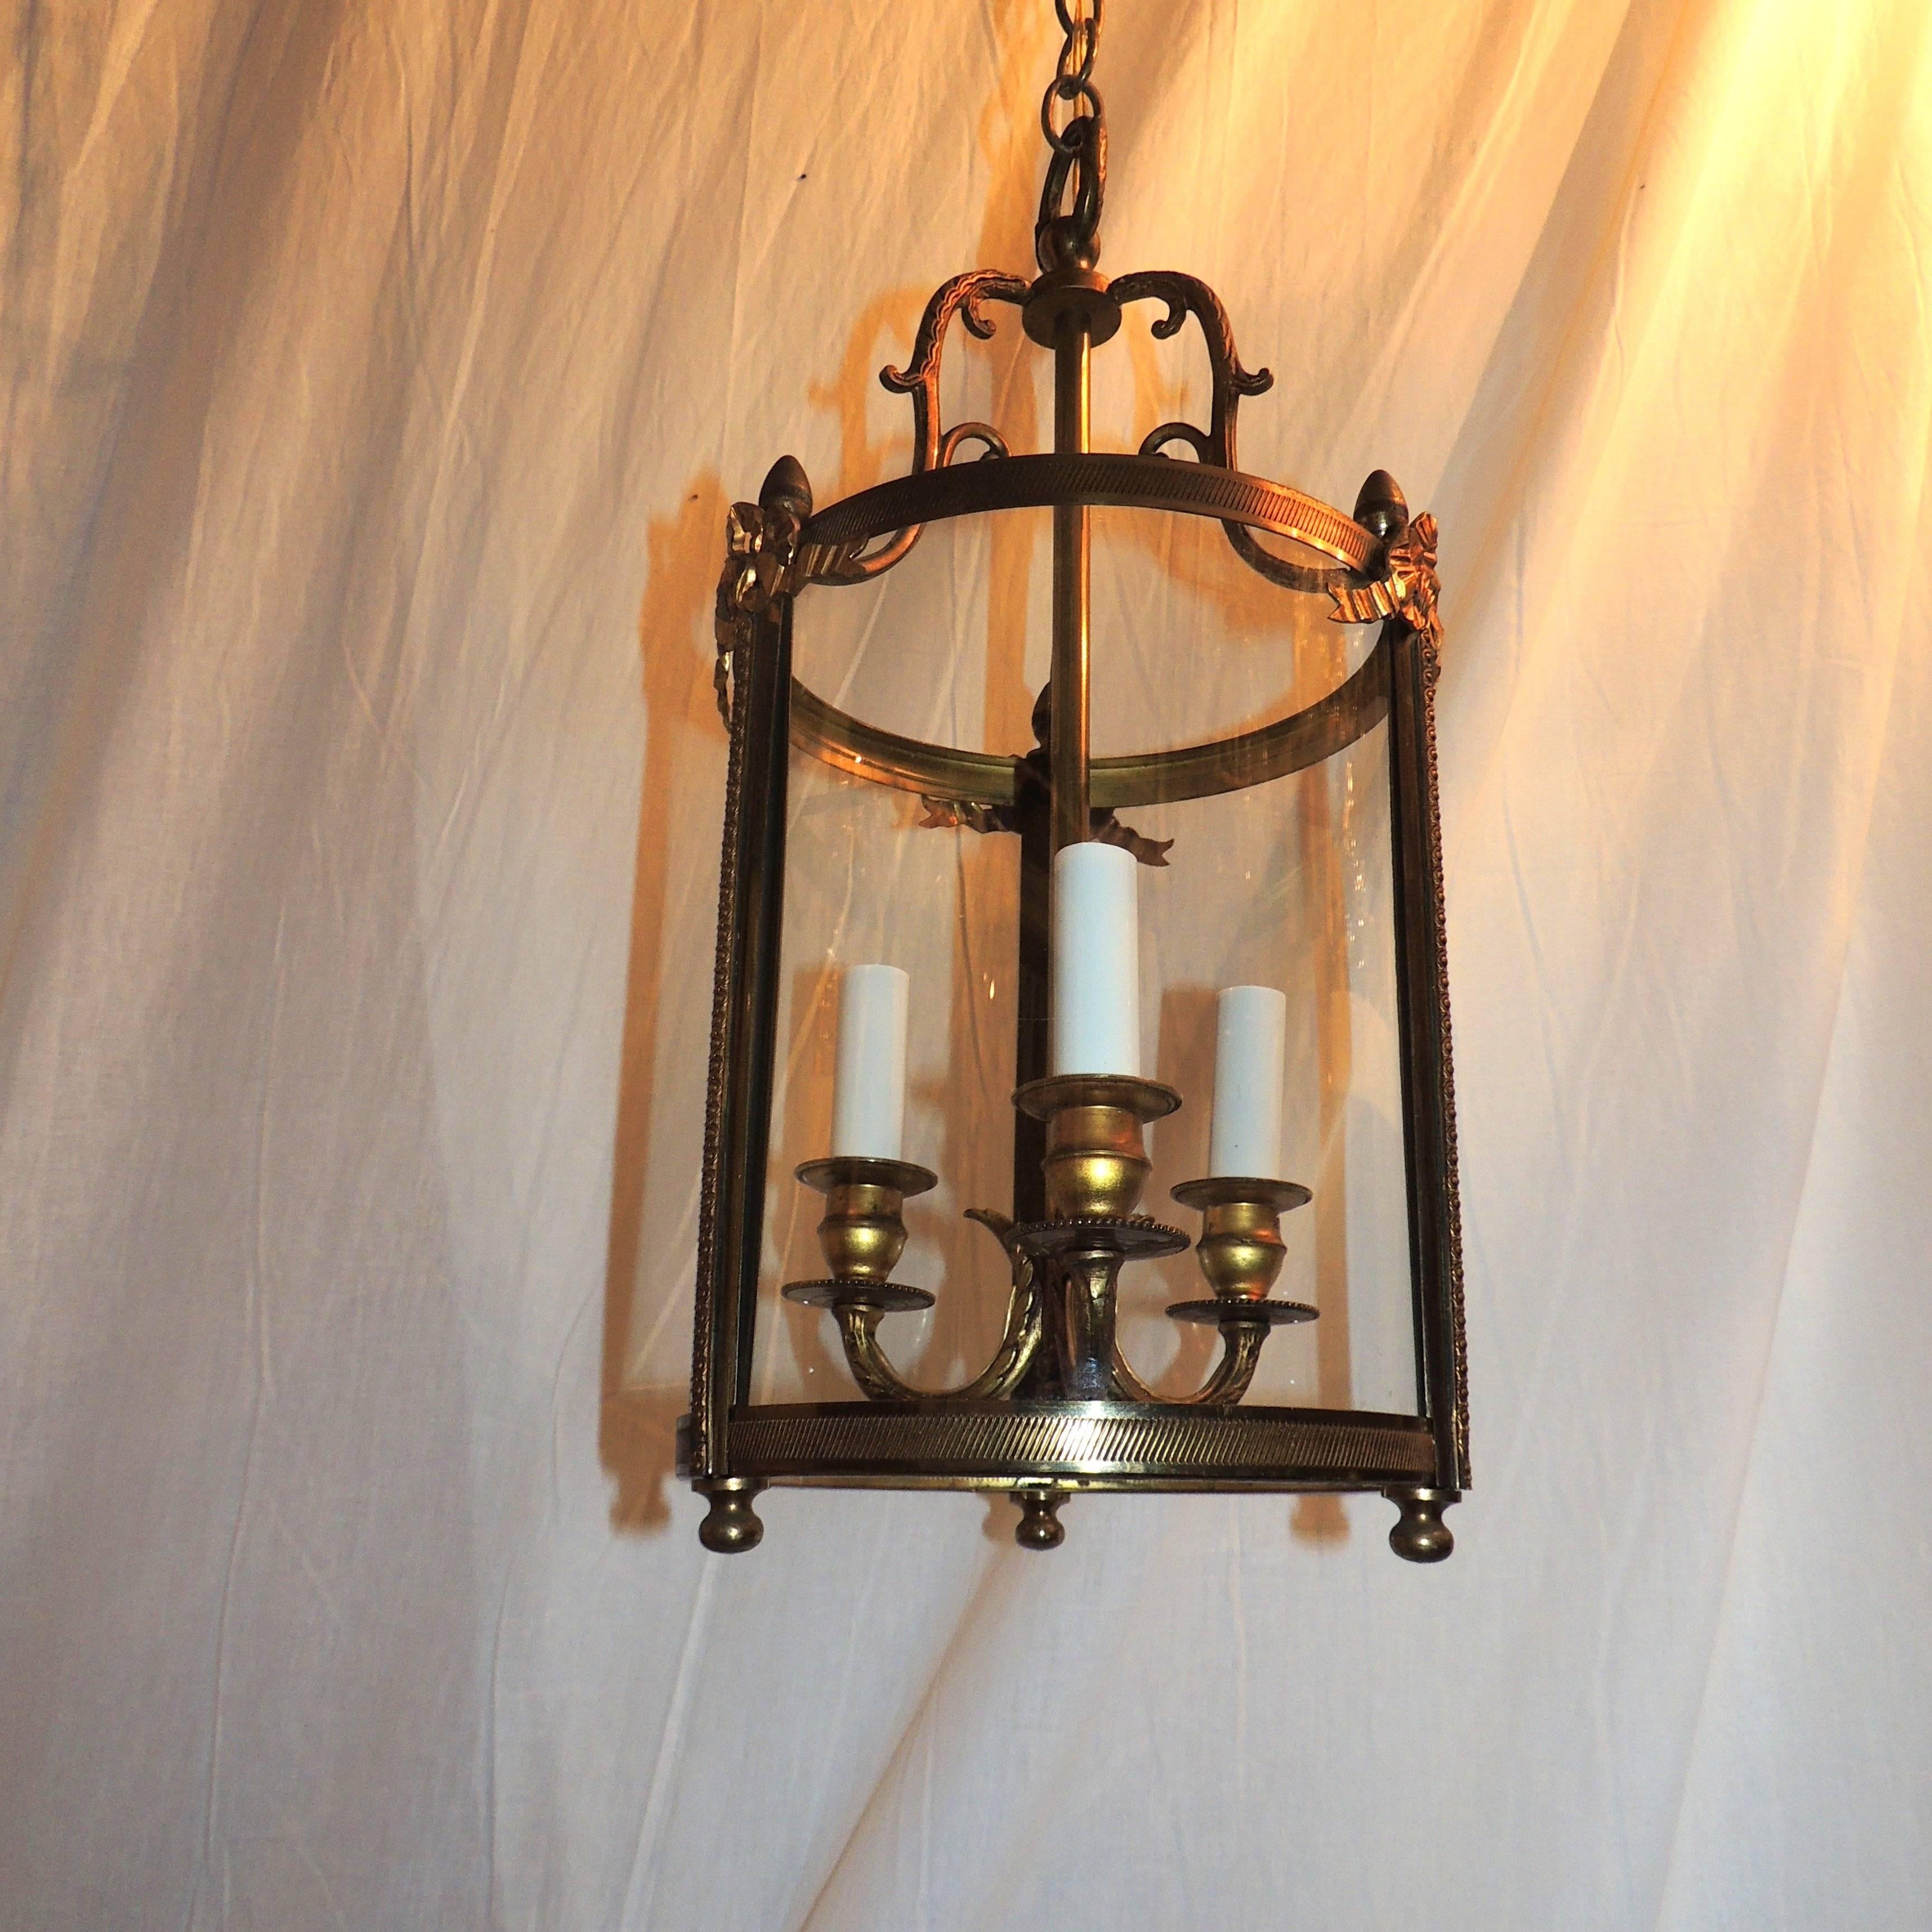 Wonderful French Ribbon Bow Gilt Bronze Three-Light Lantern Chandelier Fixture In Good Condition For Sale In Roslyn, NY